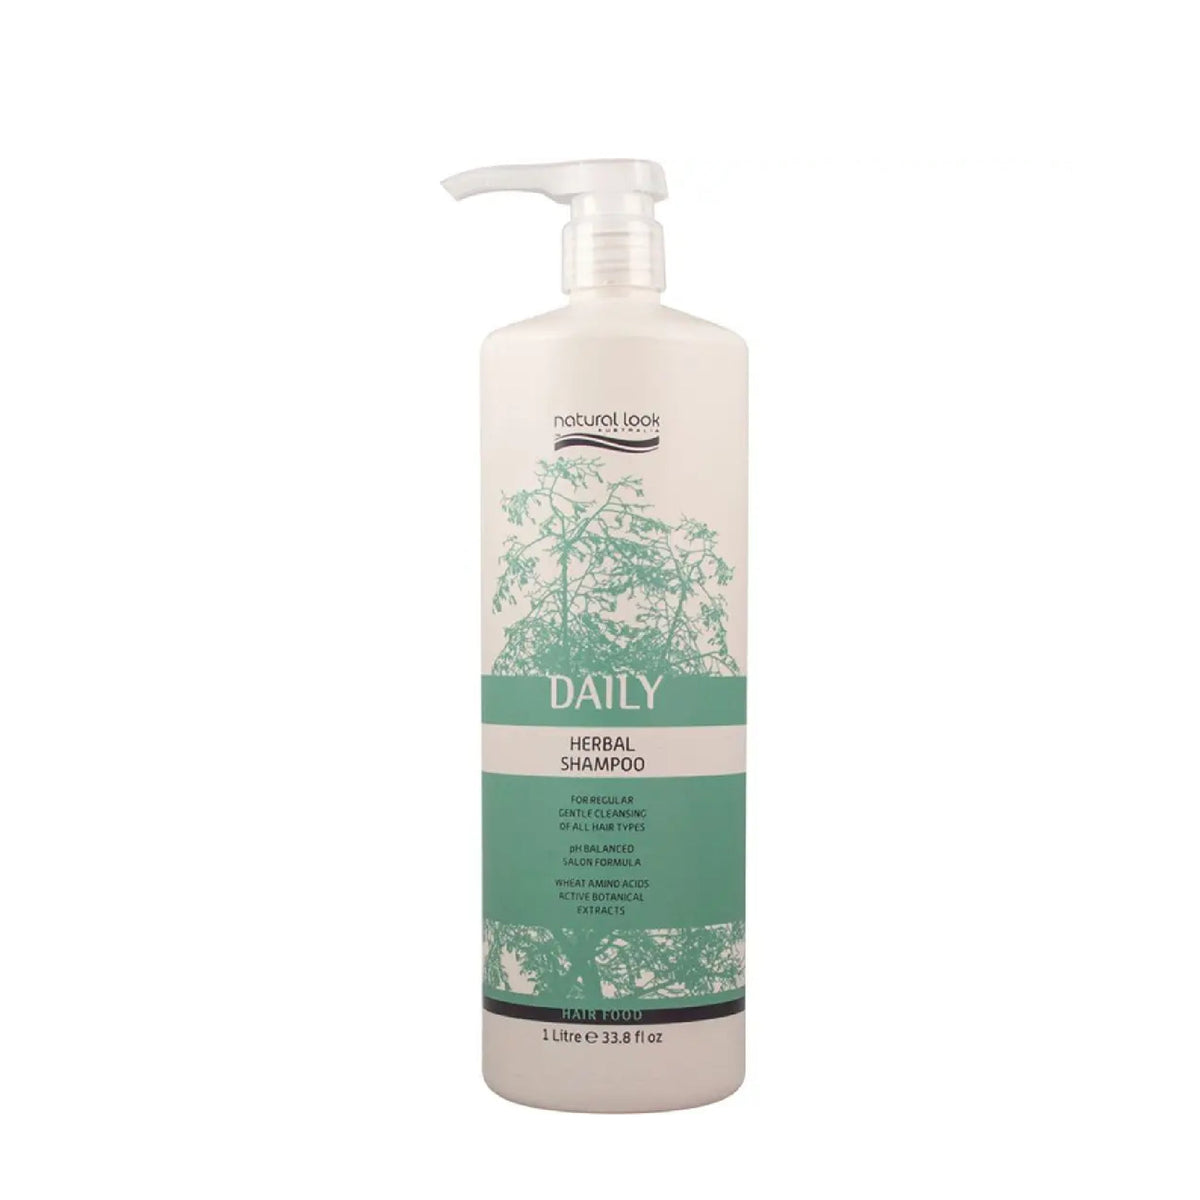 Natural Look Daily Herbal Shampoo 1Ltr - Haircare Superstore